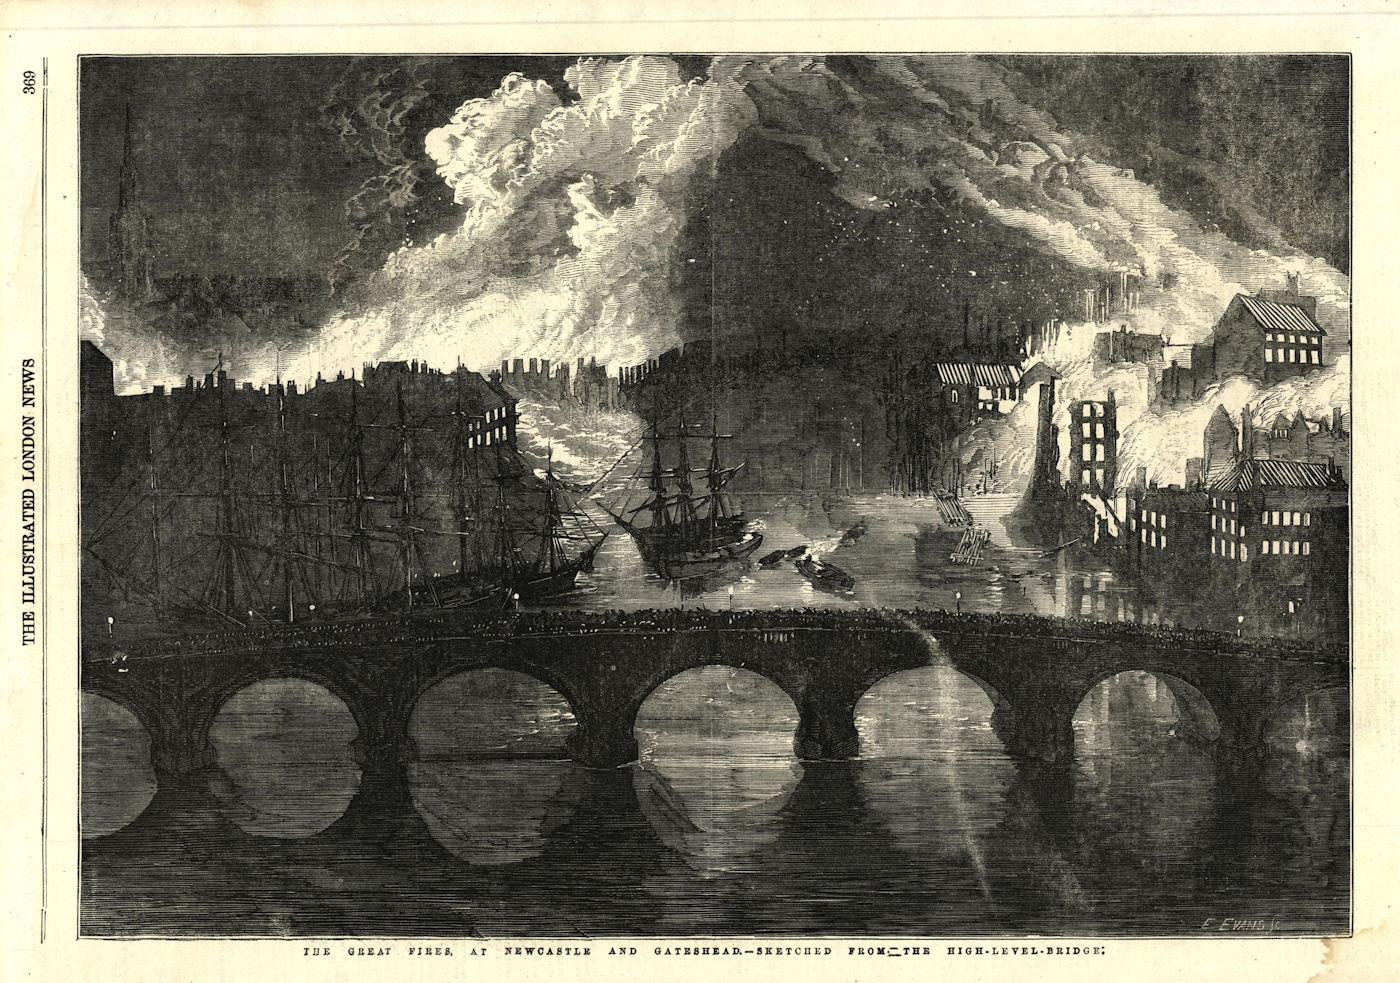 The great fires at Newcastle & Gateshead from the High Level Bridge 1854 print